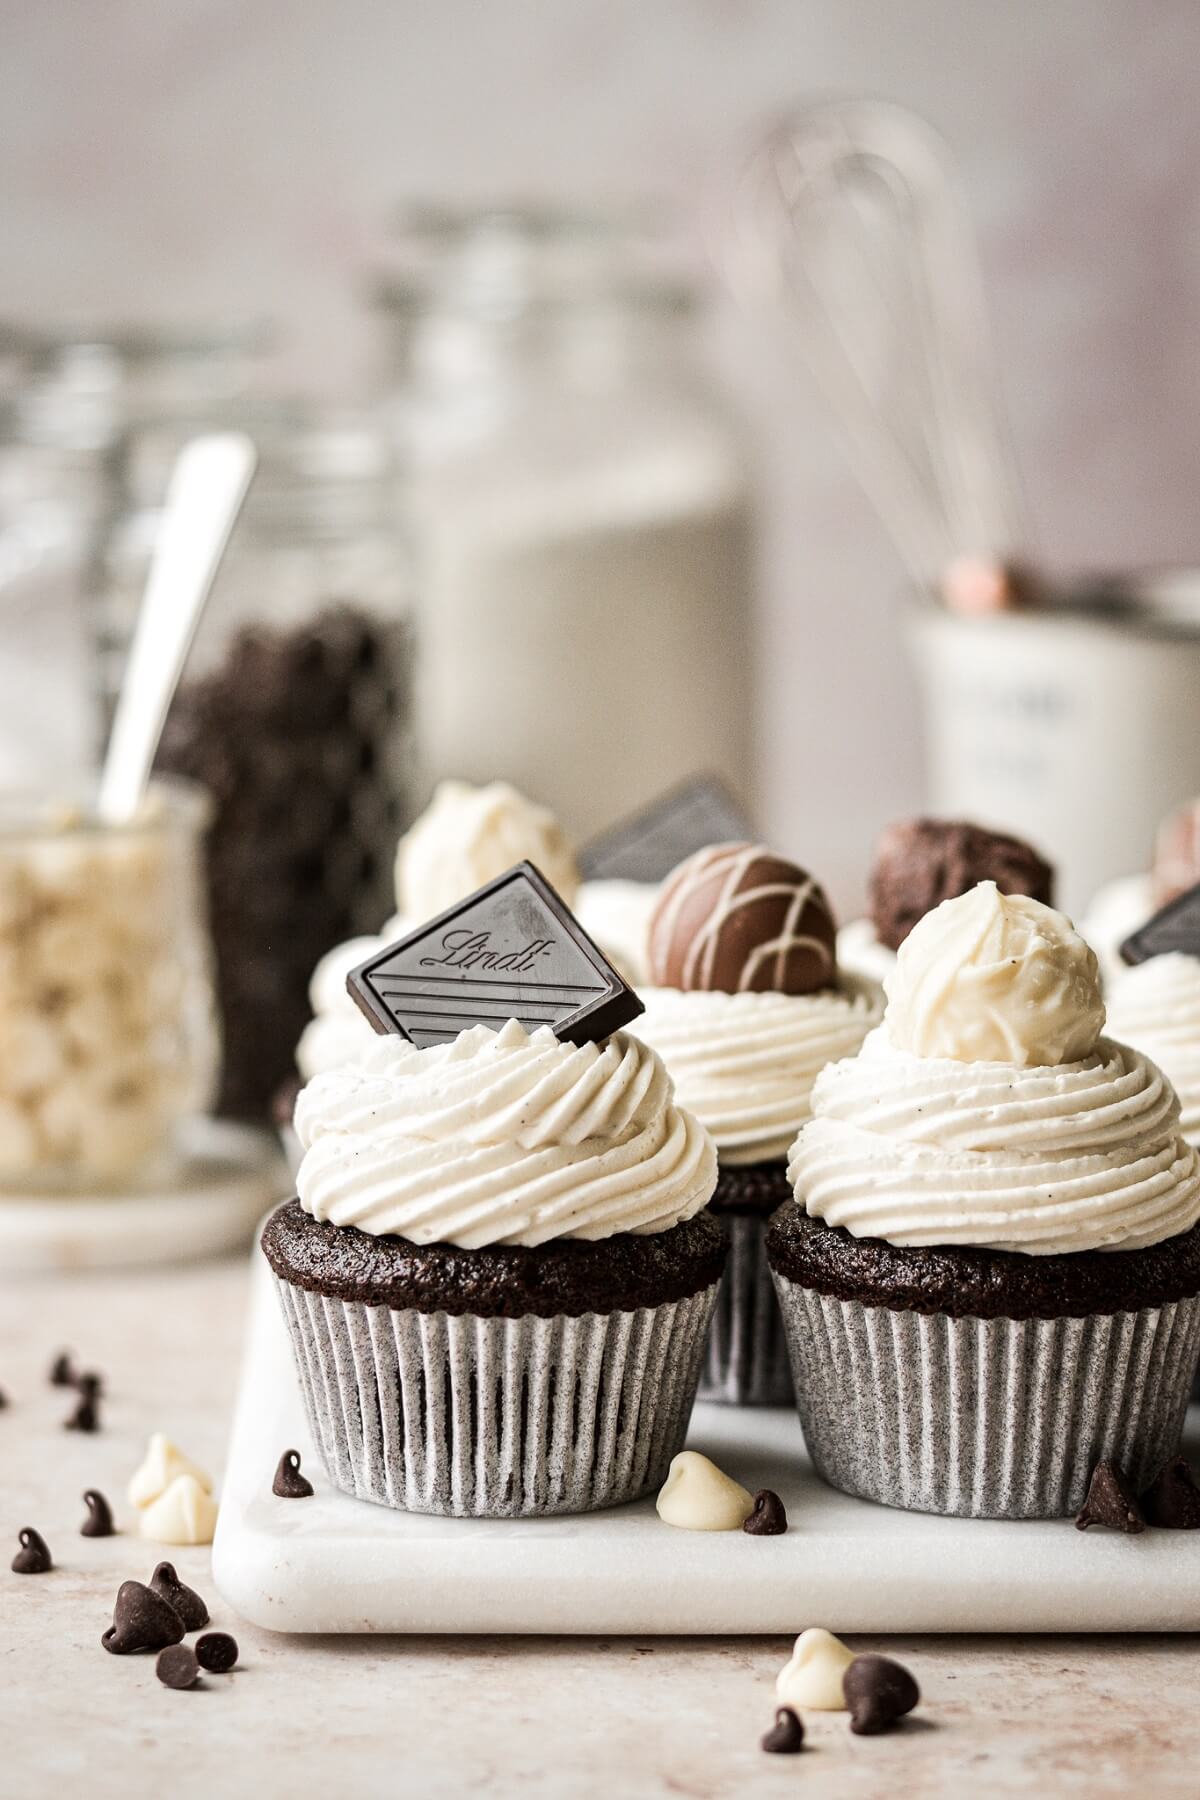 Black and white chocolate cupcakes topped with chocolate truffles.